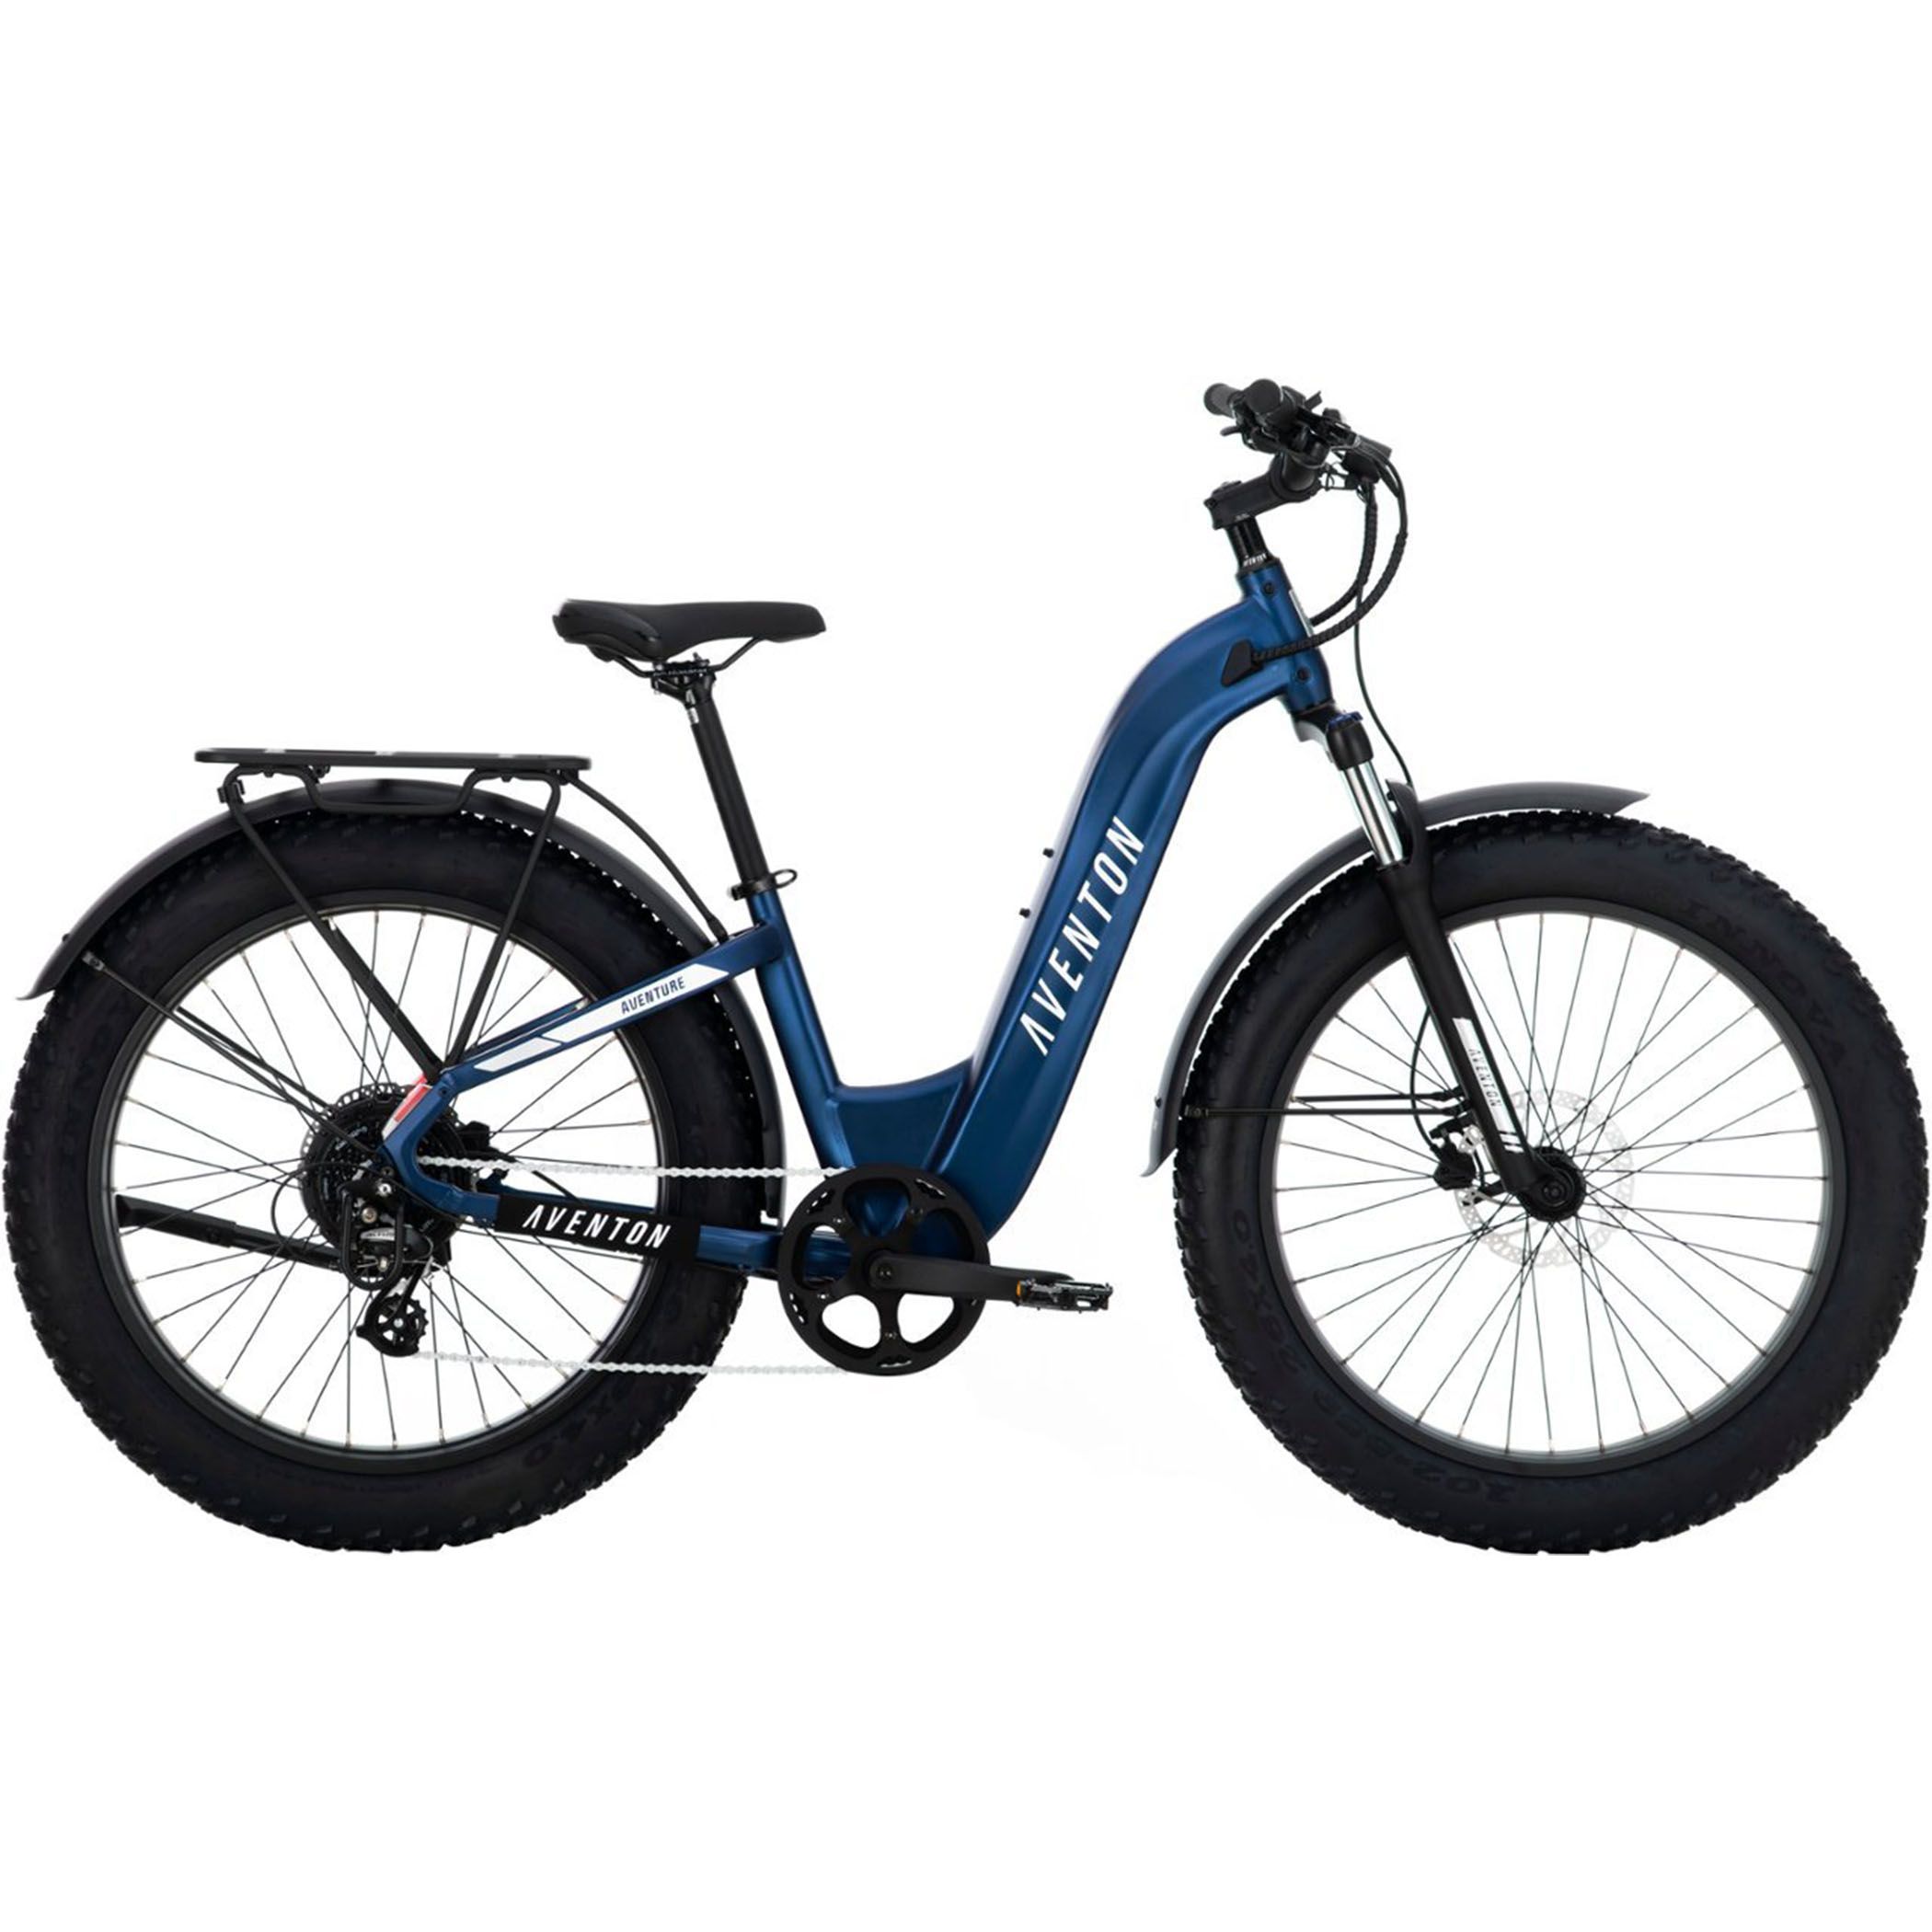 <p><strong>$1799.00</strong></p><p><a href="https://go.redirectingat.com?id=74968X1553576&url=https%3A%2F%2Fwww.aventon.com%2Fproducts%2Faventure2-ebike&sref=https%3A%2F%2Fwww.roadandtrack.com%2Fgear%2Flifestyle%2Fg46464030%2Fbest-electric-bikes%2F">Shop Now</a></p><p>Aventon updated its popular Aventure electric bicycle, resulting in significant improvements that enhance the riding experience. A new torque sensor provides better control over the bike's rear hub motor, addressing the issue of excessive torque that reviewers had with the previous iteration. This is especially helpful for those new to e-bicycles.</p><p>Other upgrades include an updated head unit interface, integrated turn signals, a front light, a rear rack, and fenders, making the bike more versatile for commuting in various conditions. While the folks at <em>Bicycling</em> <a href="https://go.redirectingat.com?id=74968X1553576&url=https%3A%2F%2Fwww.aventon.com%2Fproducts%2Faventure2-ebike&sref=https%3A%2F%2Fwww.roadandtrack.com%2Fgear%2Flifestyle%2Fg46464030%2Fbest-electric-bikes%2F">found</a> that the bike works well on snowy days and gravel pathways, its weight and components limit its performance on challenging trails.</p>